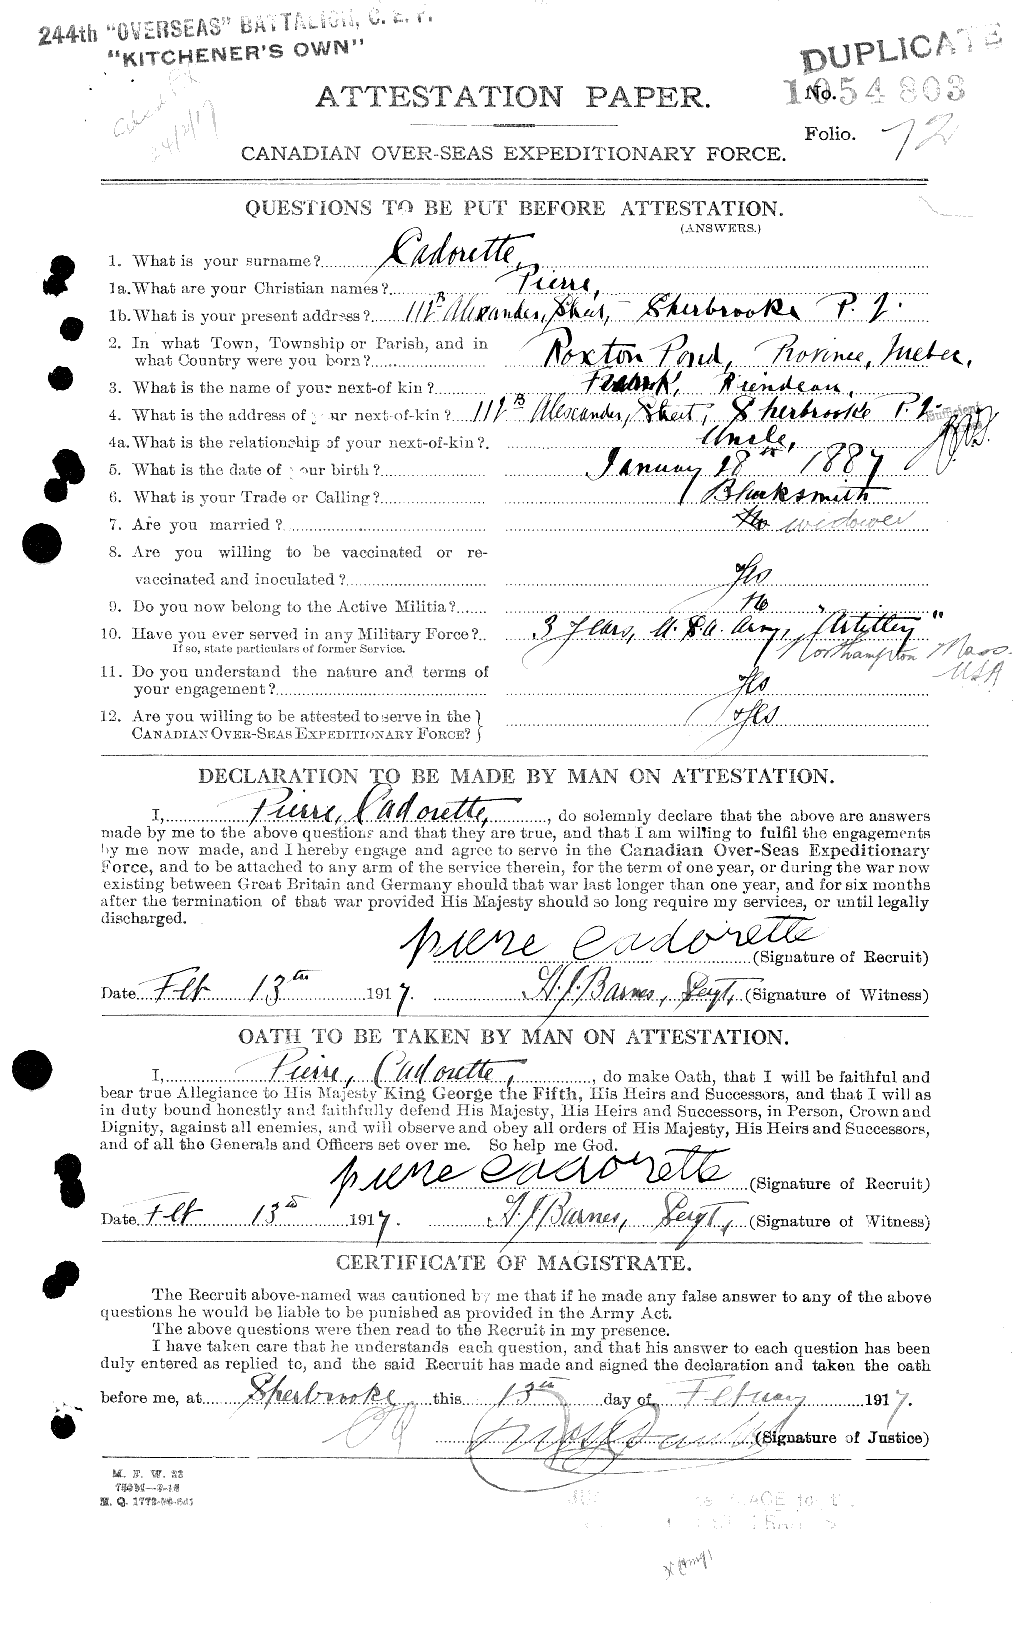 Personnel Records of the First World War - CEF 001674a